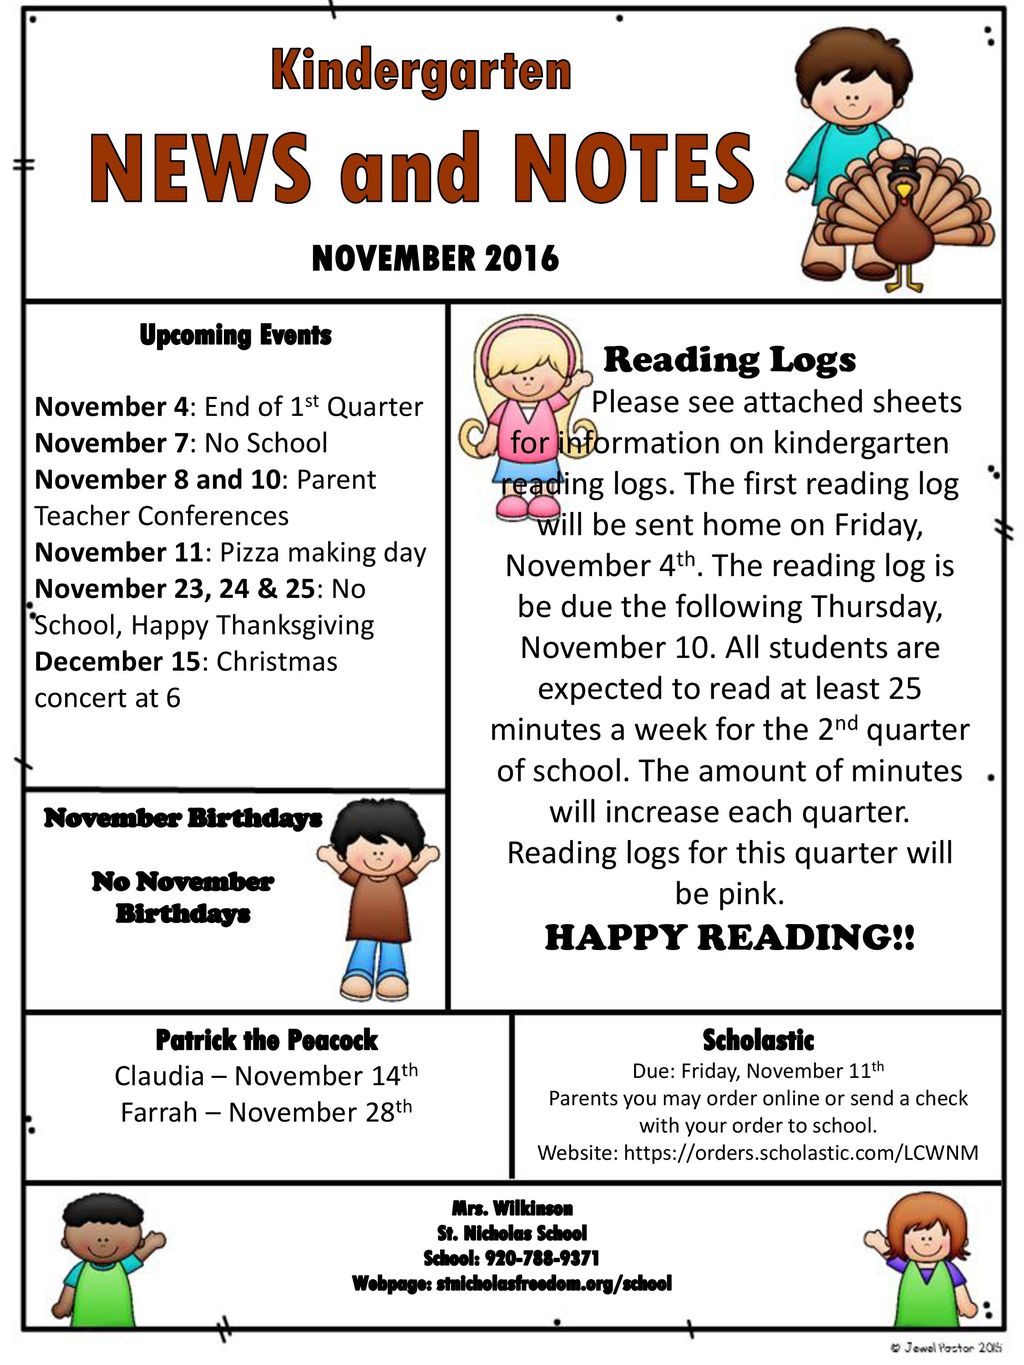 News and notes for the end of november teach to be happy sign